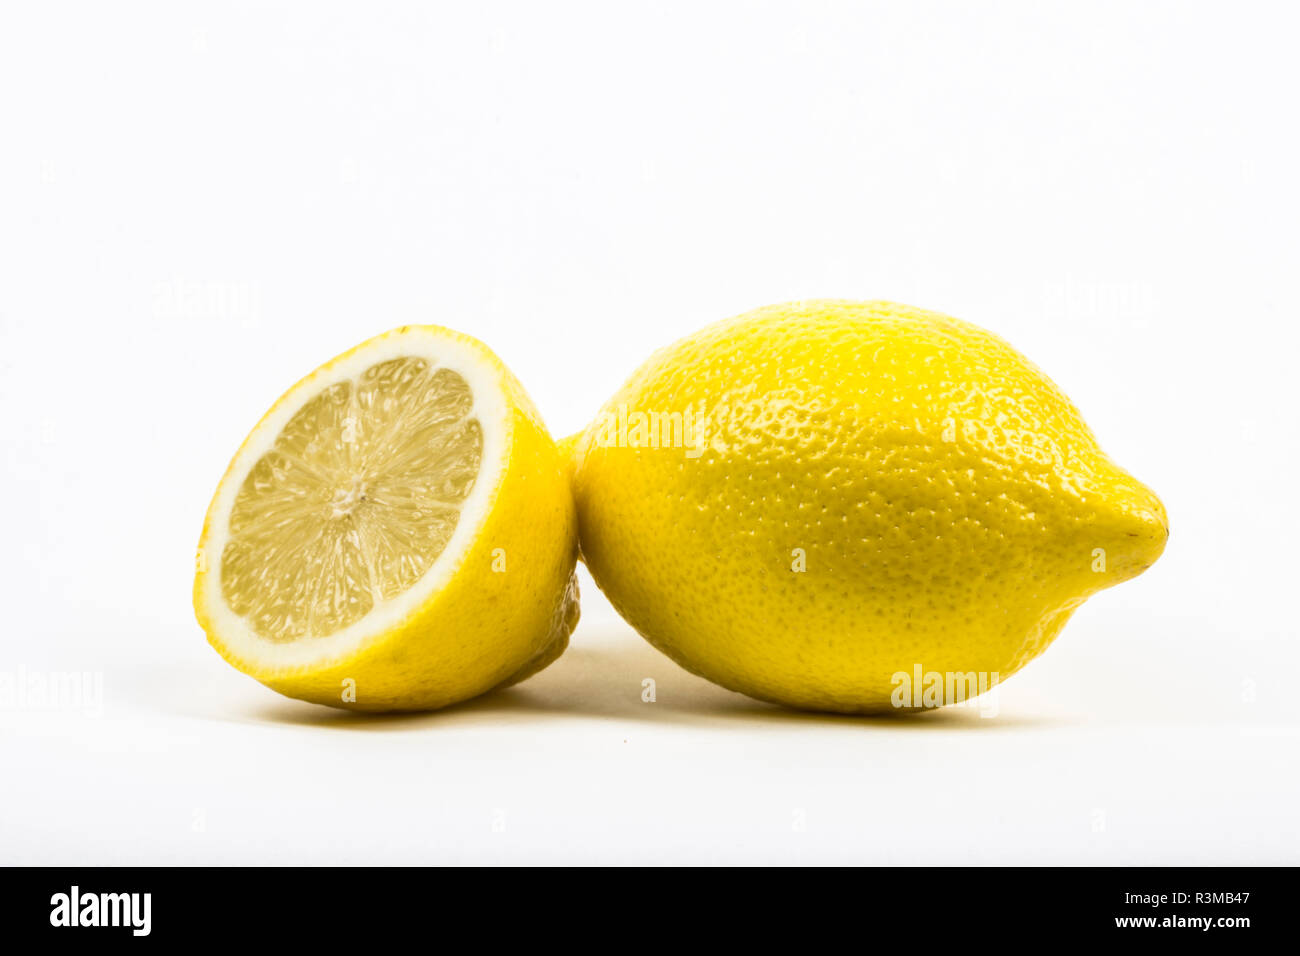 A whole lemon and a lemon cut in half. isolated in white with copy space. Stock Photo